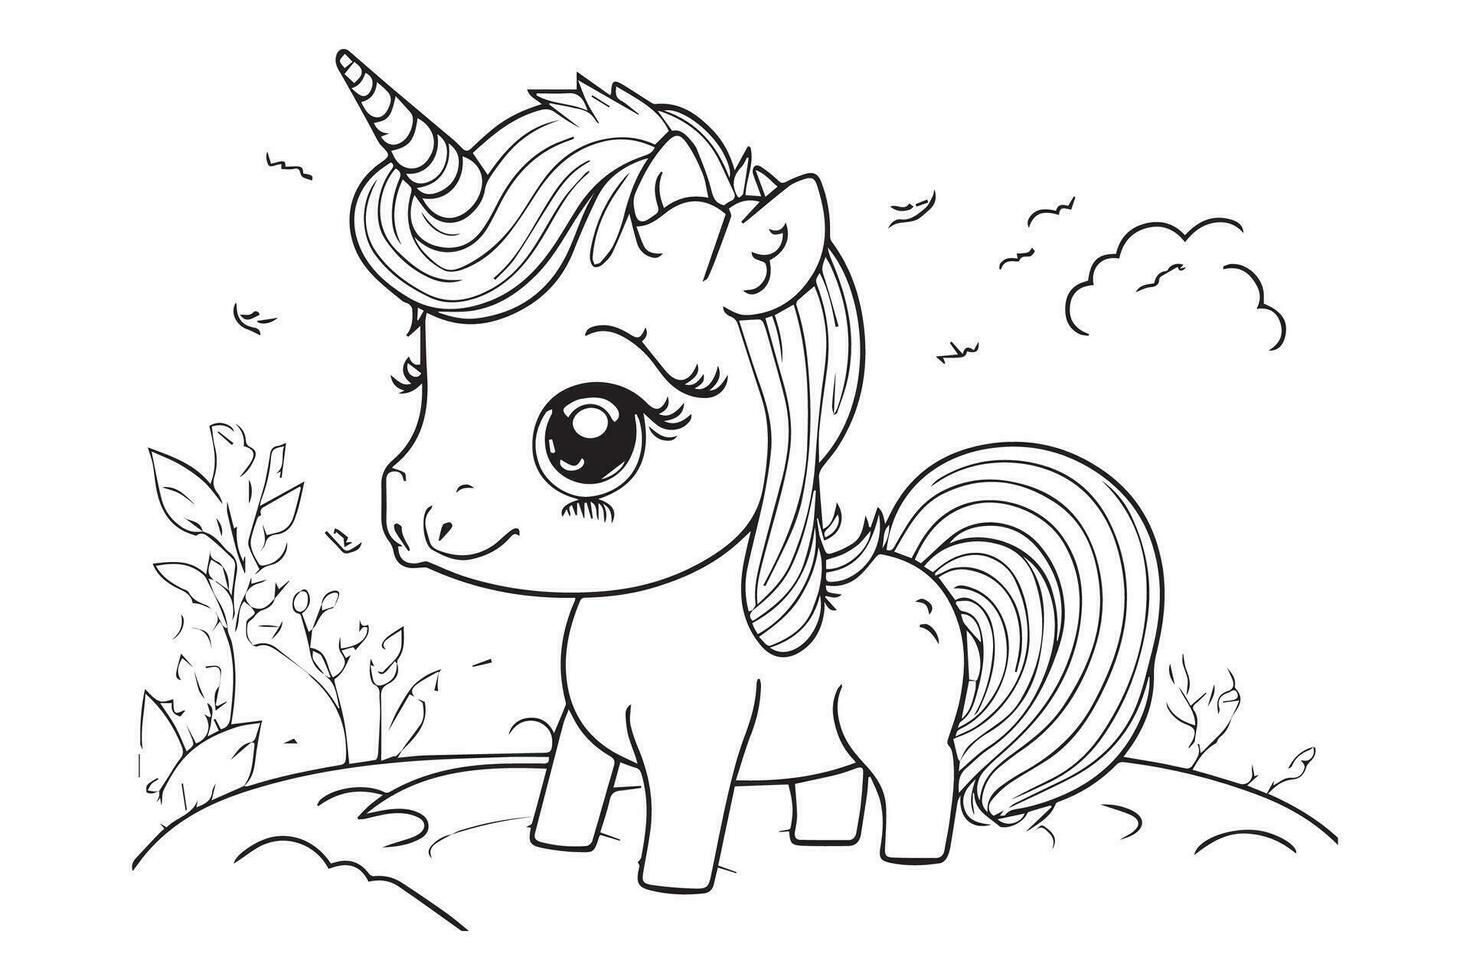 cute unicorn coloring book page, children drawing book. Coloring page for kids and adults. vector